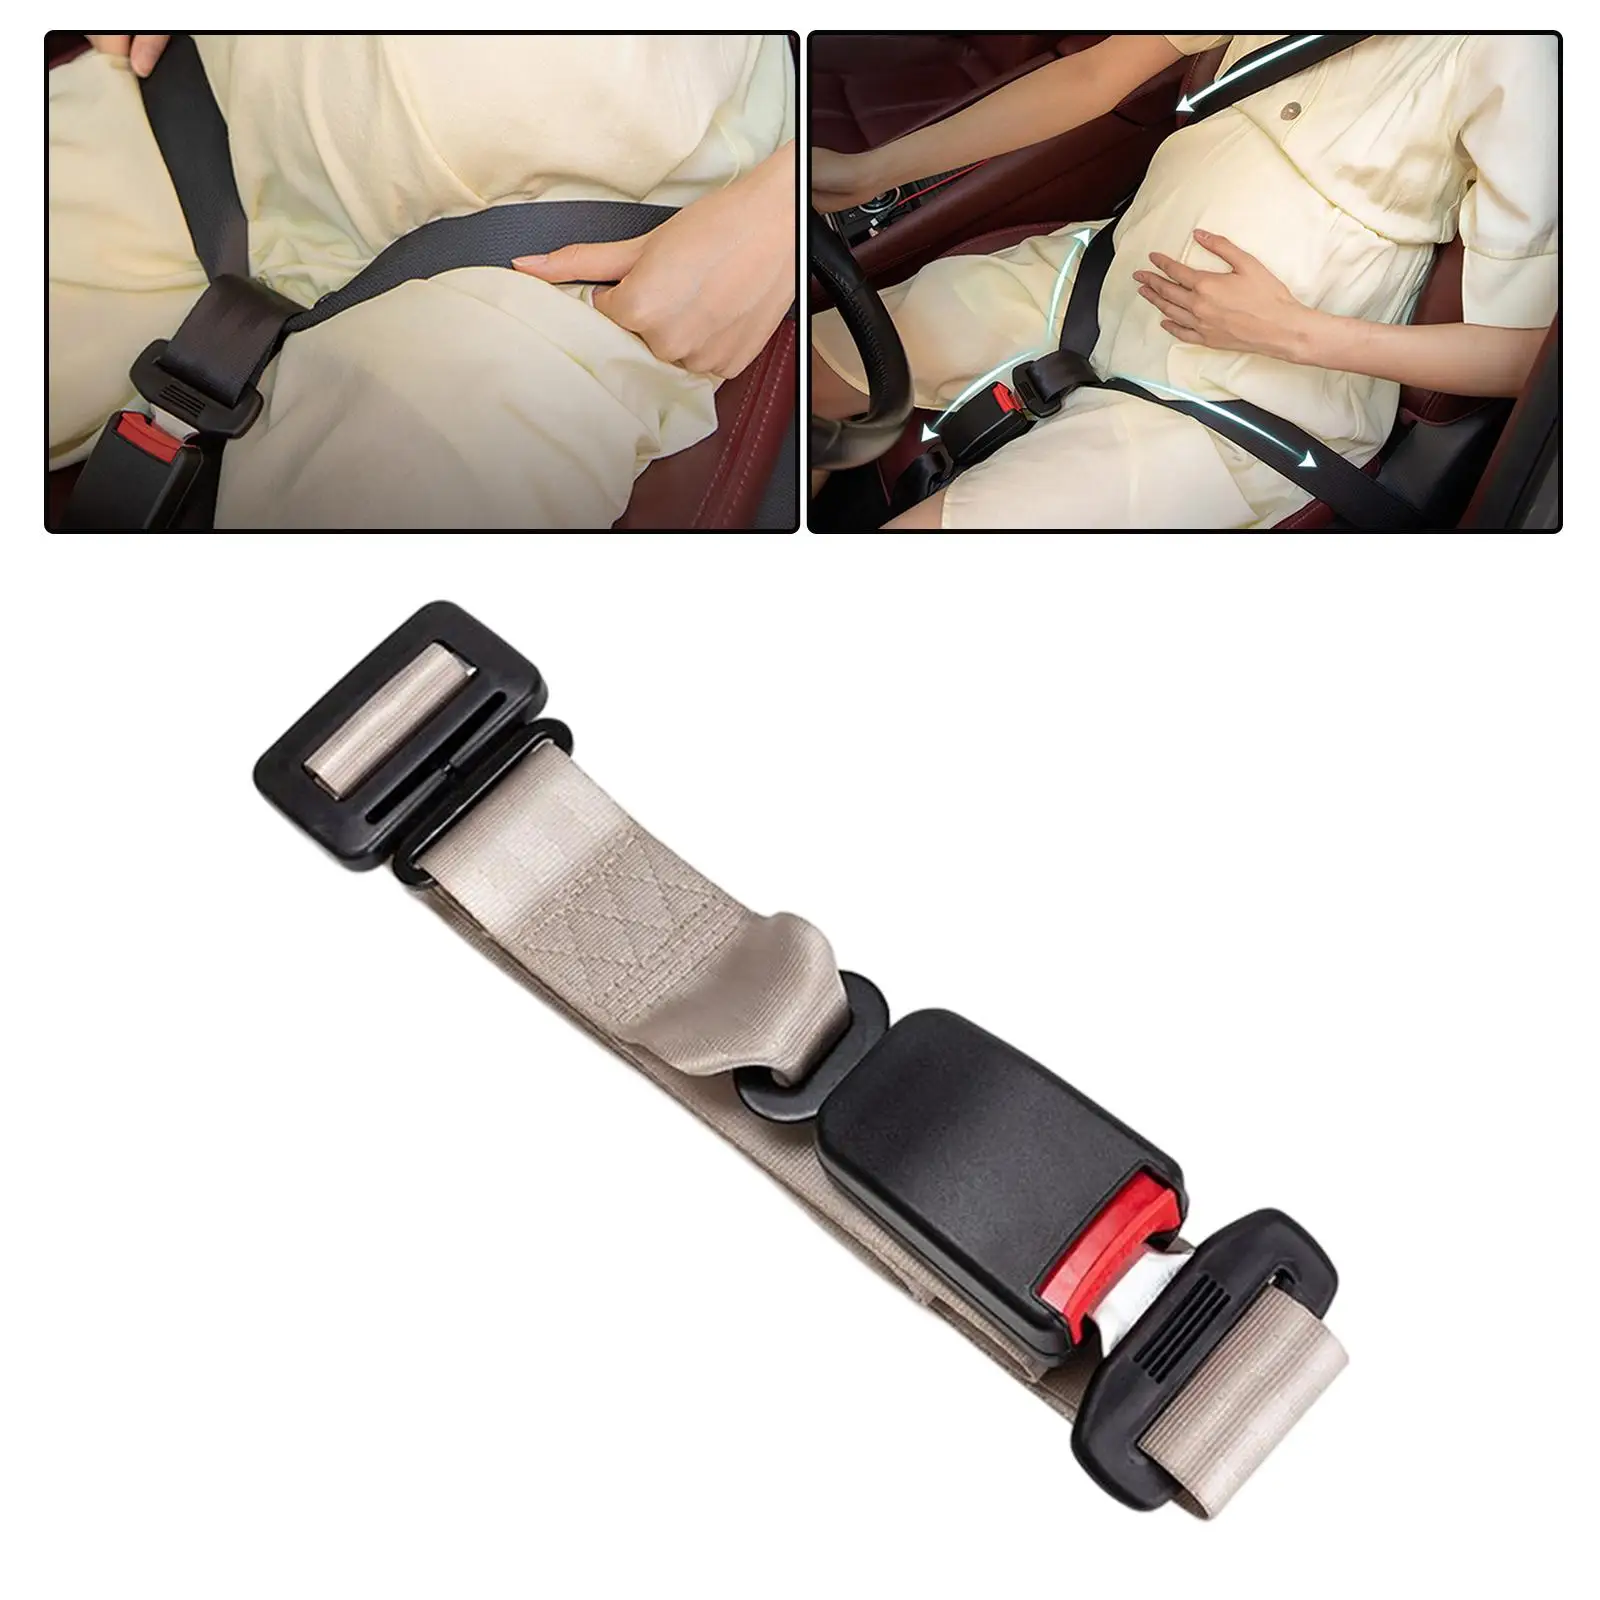 Pregnancy Car Seat Safety belt Accessories for Pregnancy Moms